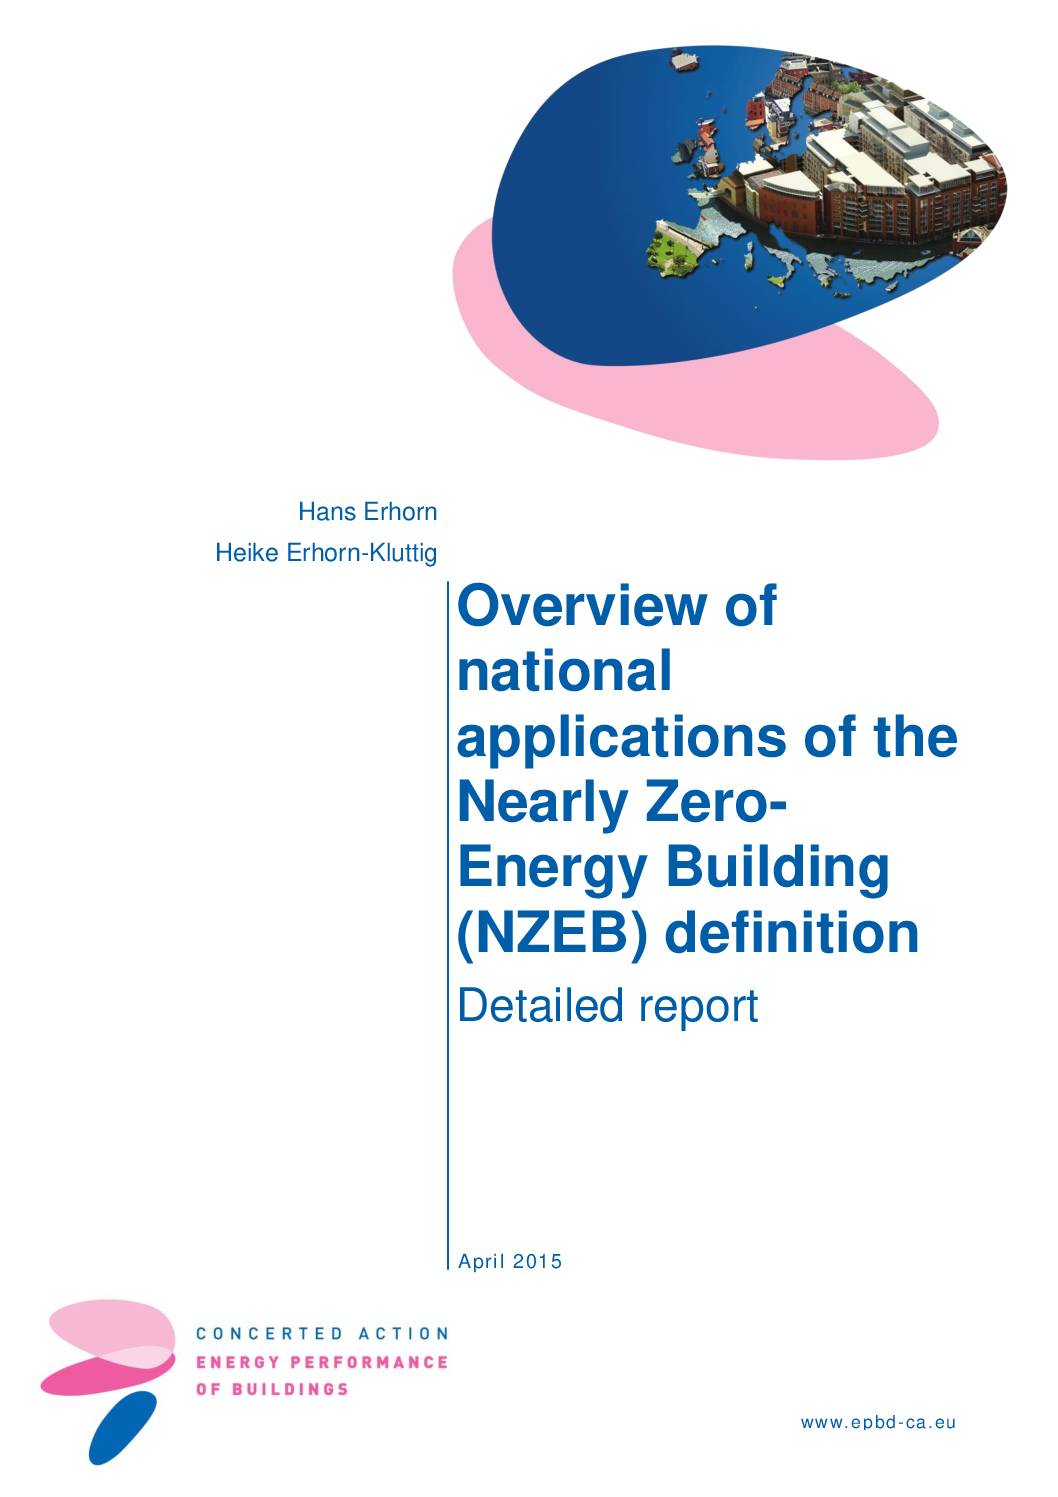 Overview of national applications of the Nearly Zero-Energy Building (NZEB) definition